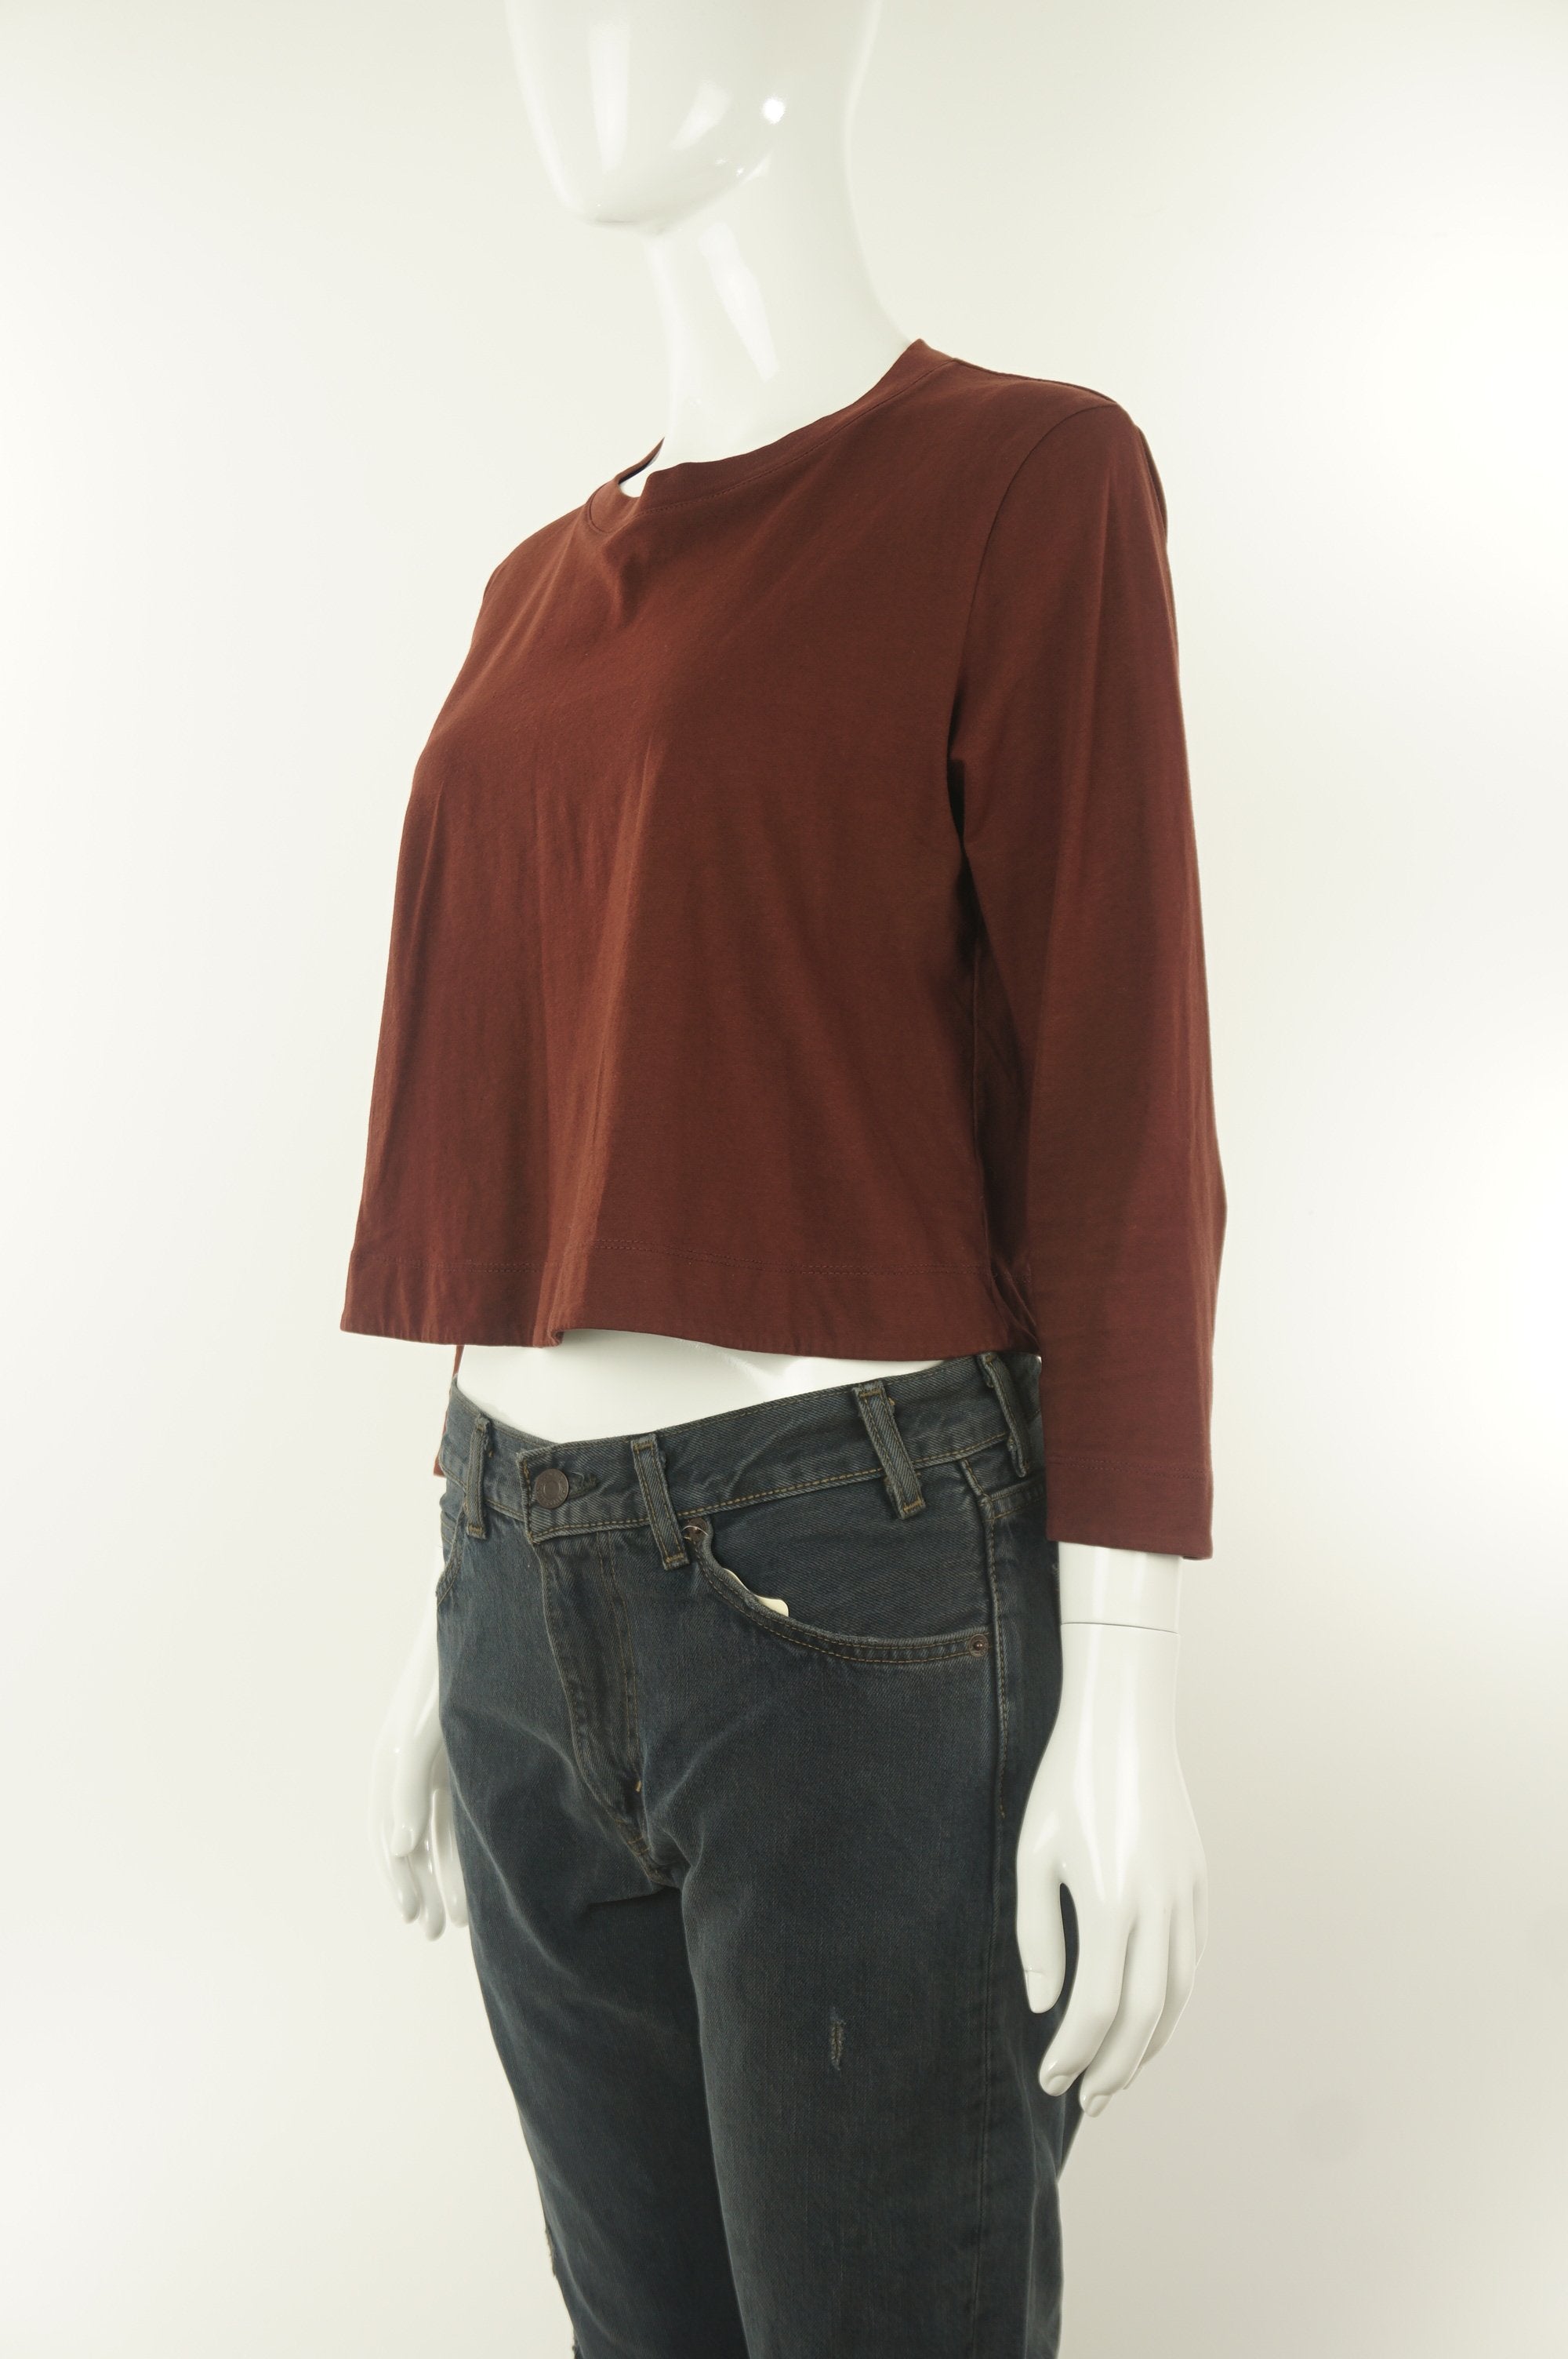 Wilfred Cute Comfy Burgundy Crop Top, If you believe in comfortable fashion that makes you look cute and not like you're trying so hard, this burgundy crop top is for you. , Red, 100% cotton, 